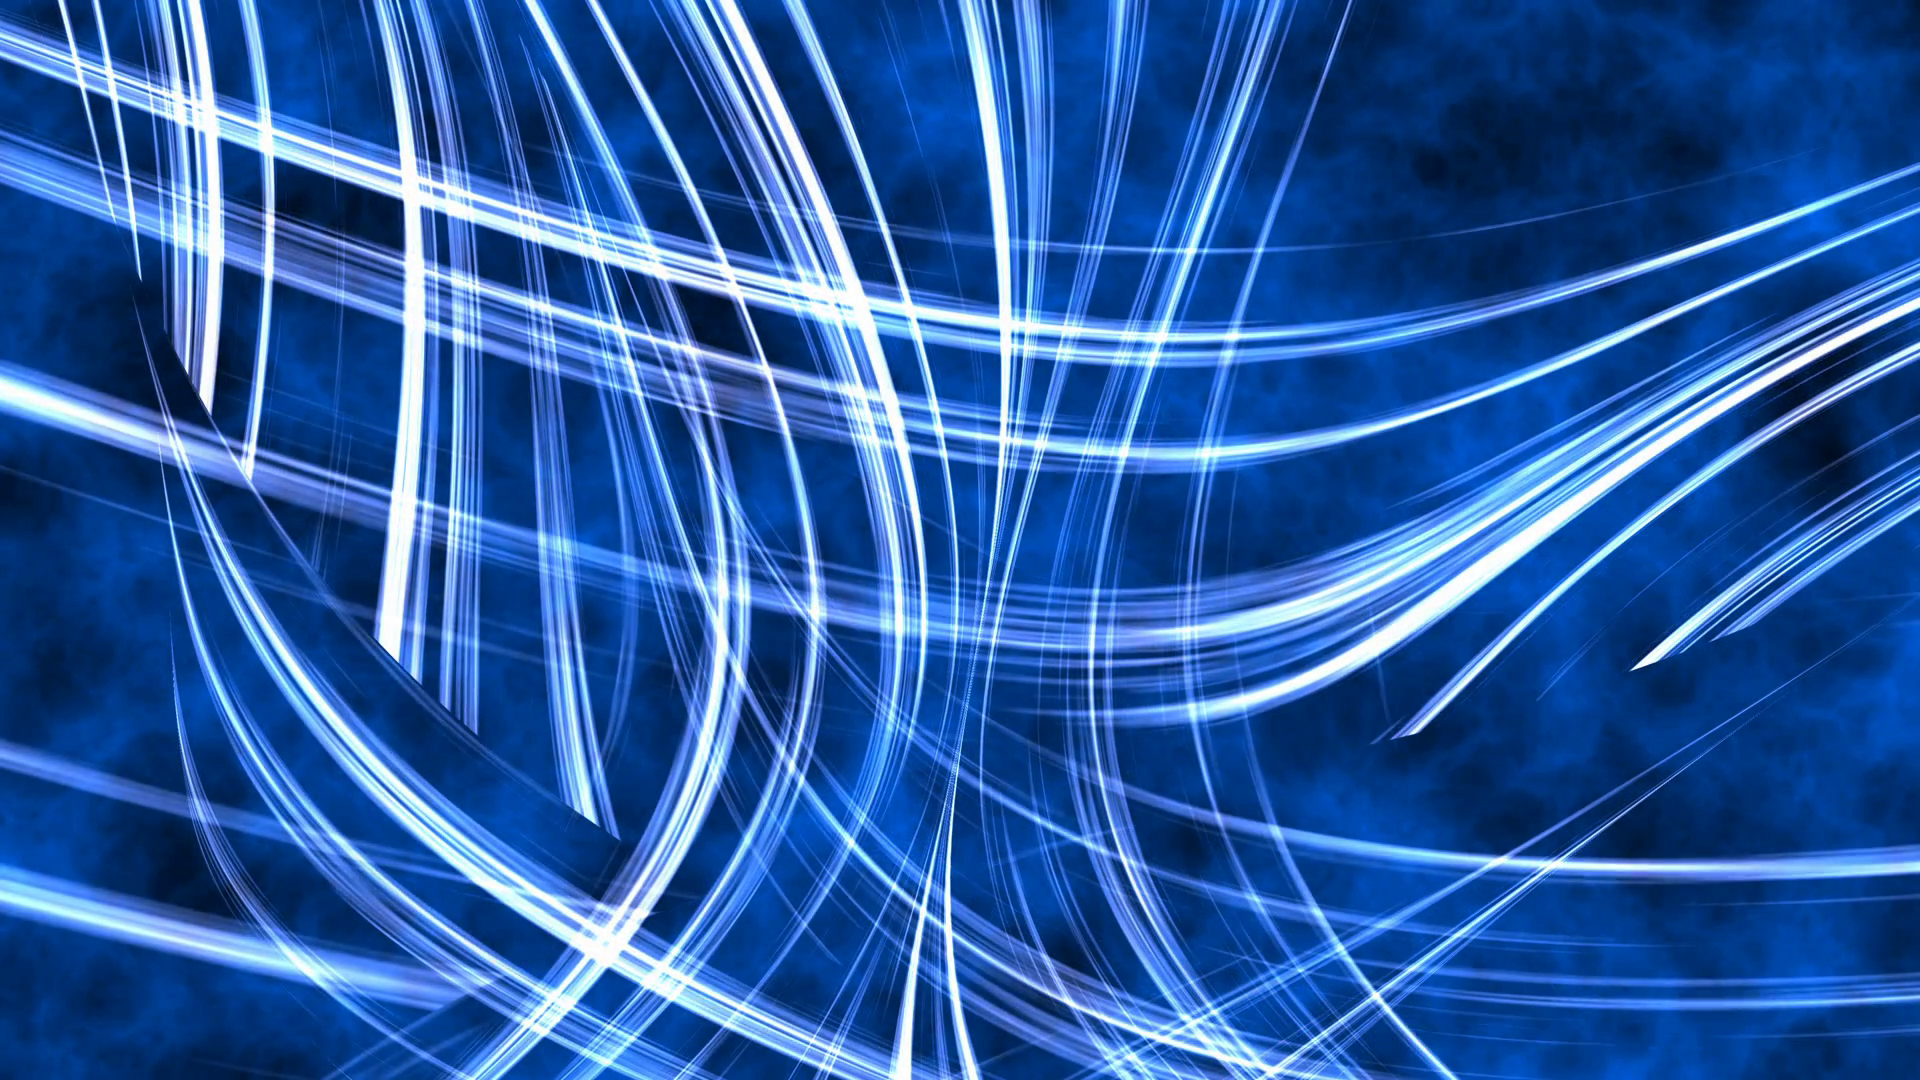 Abstract blue wavy background with energy lines and a fractal fog in ...